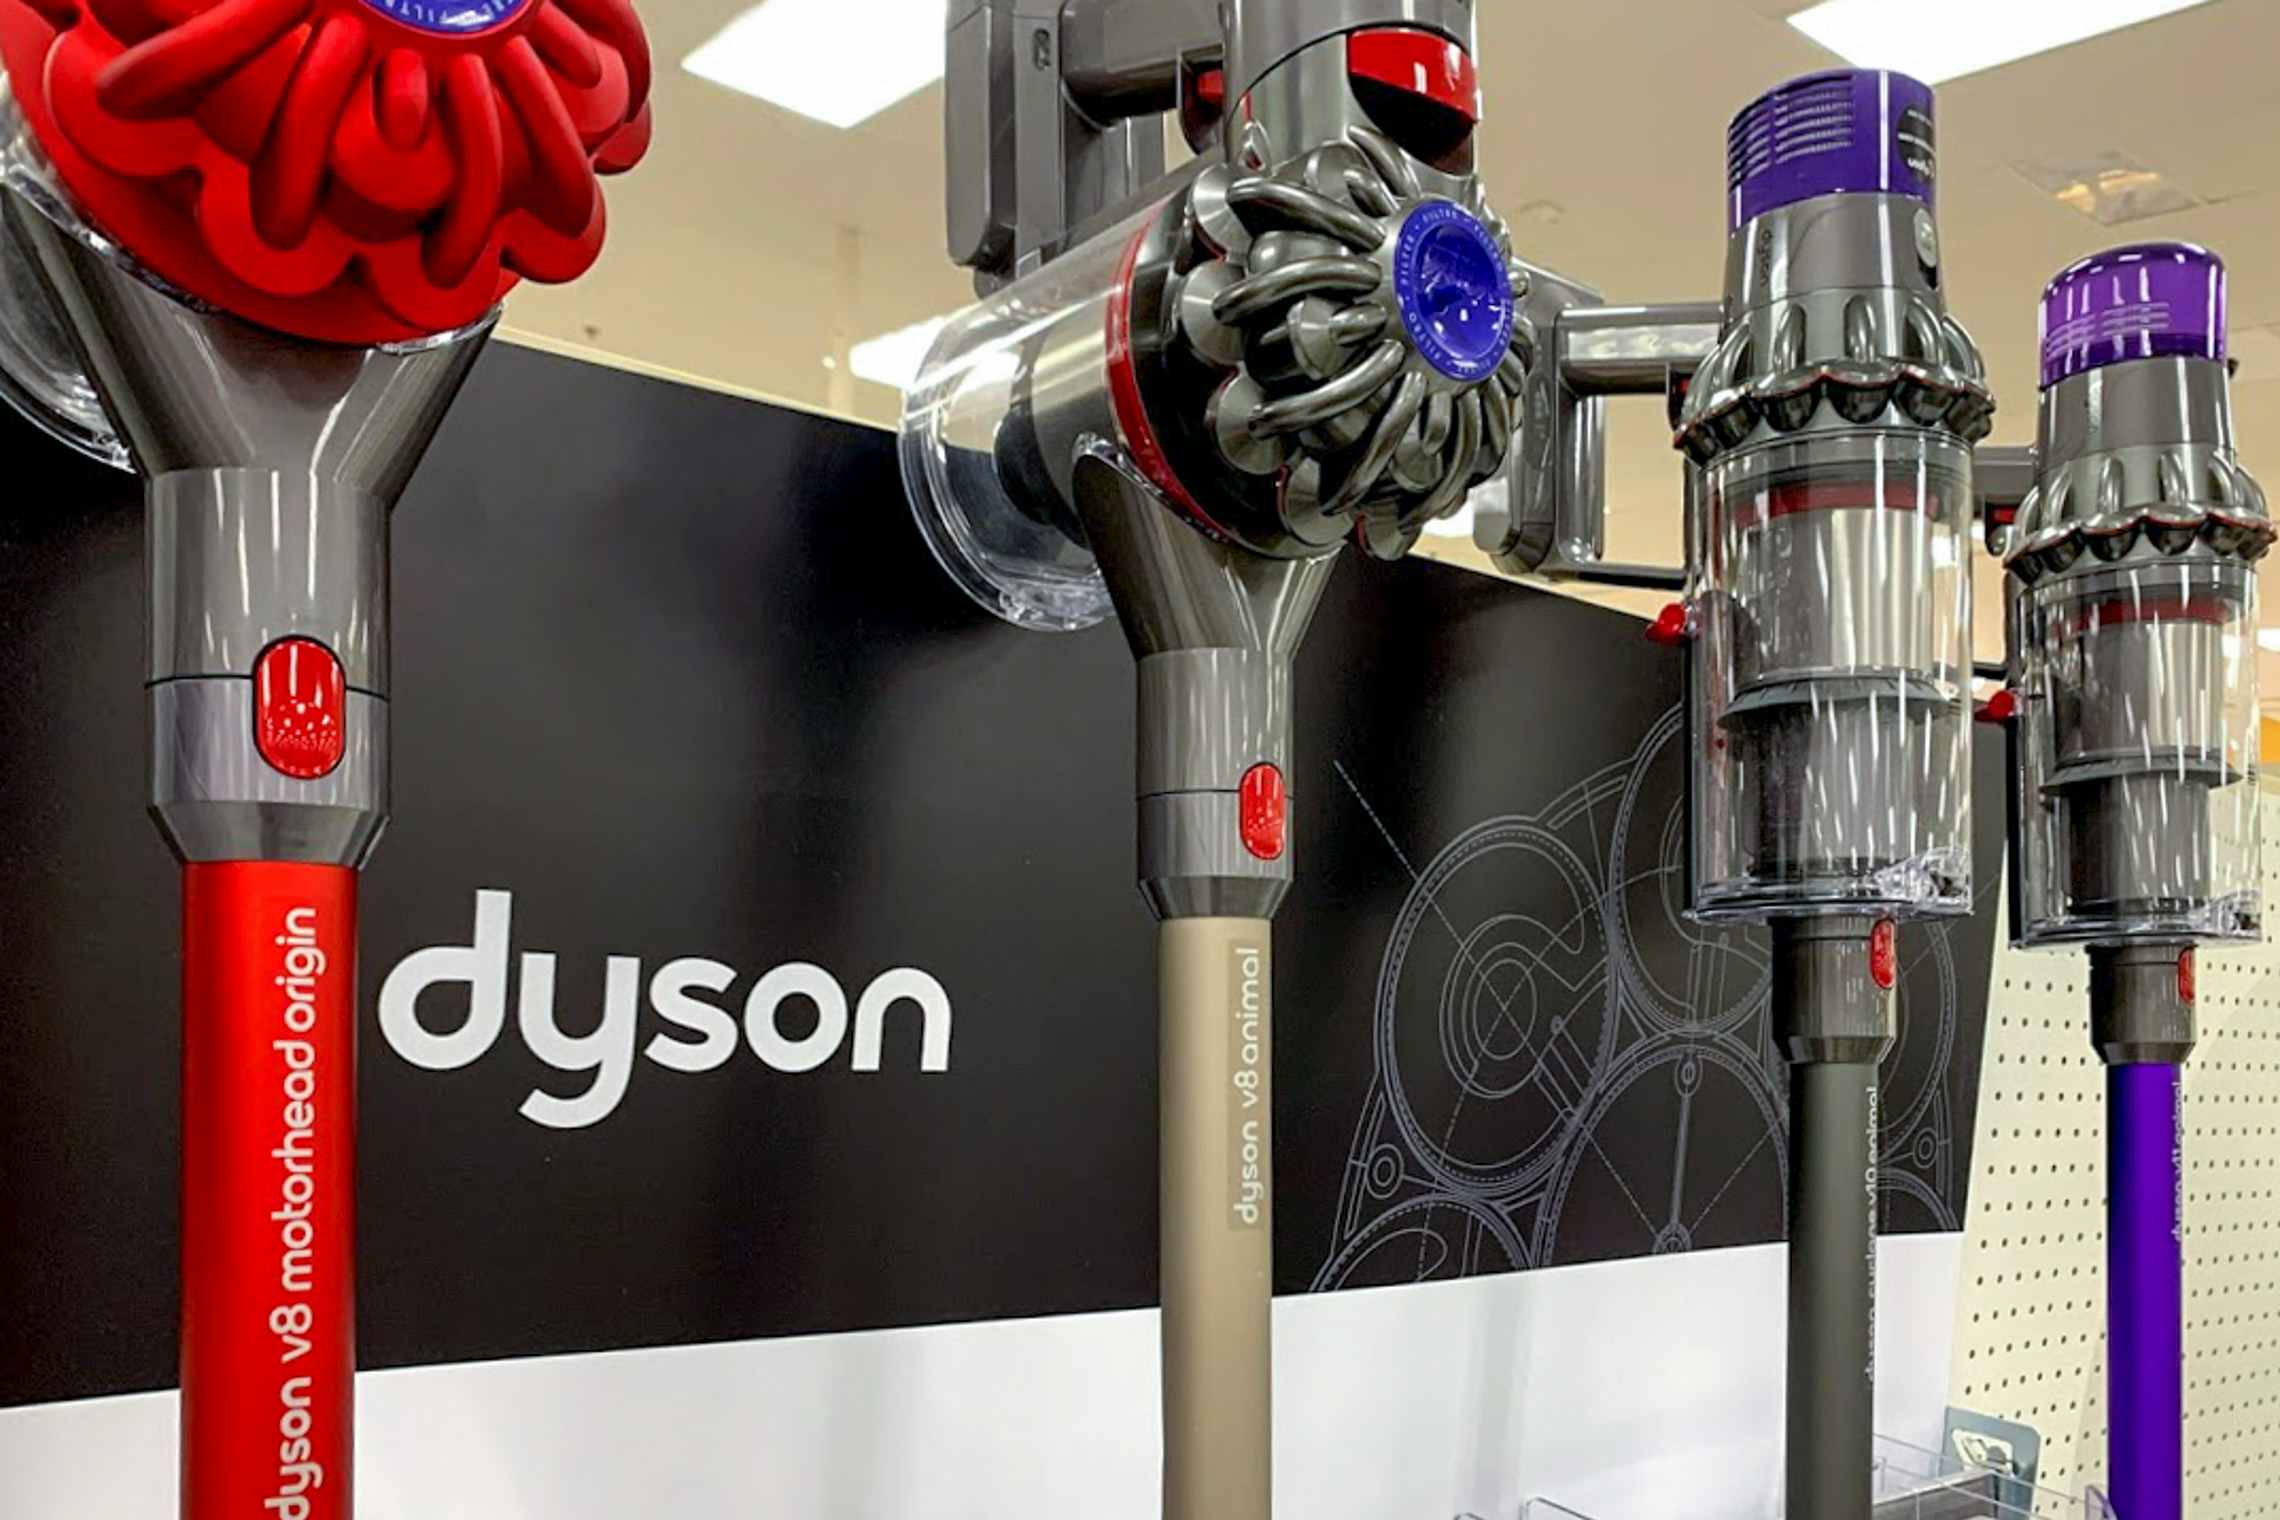 A close up on some Dyson vacuums on a store display